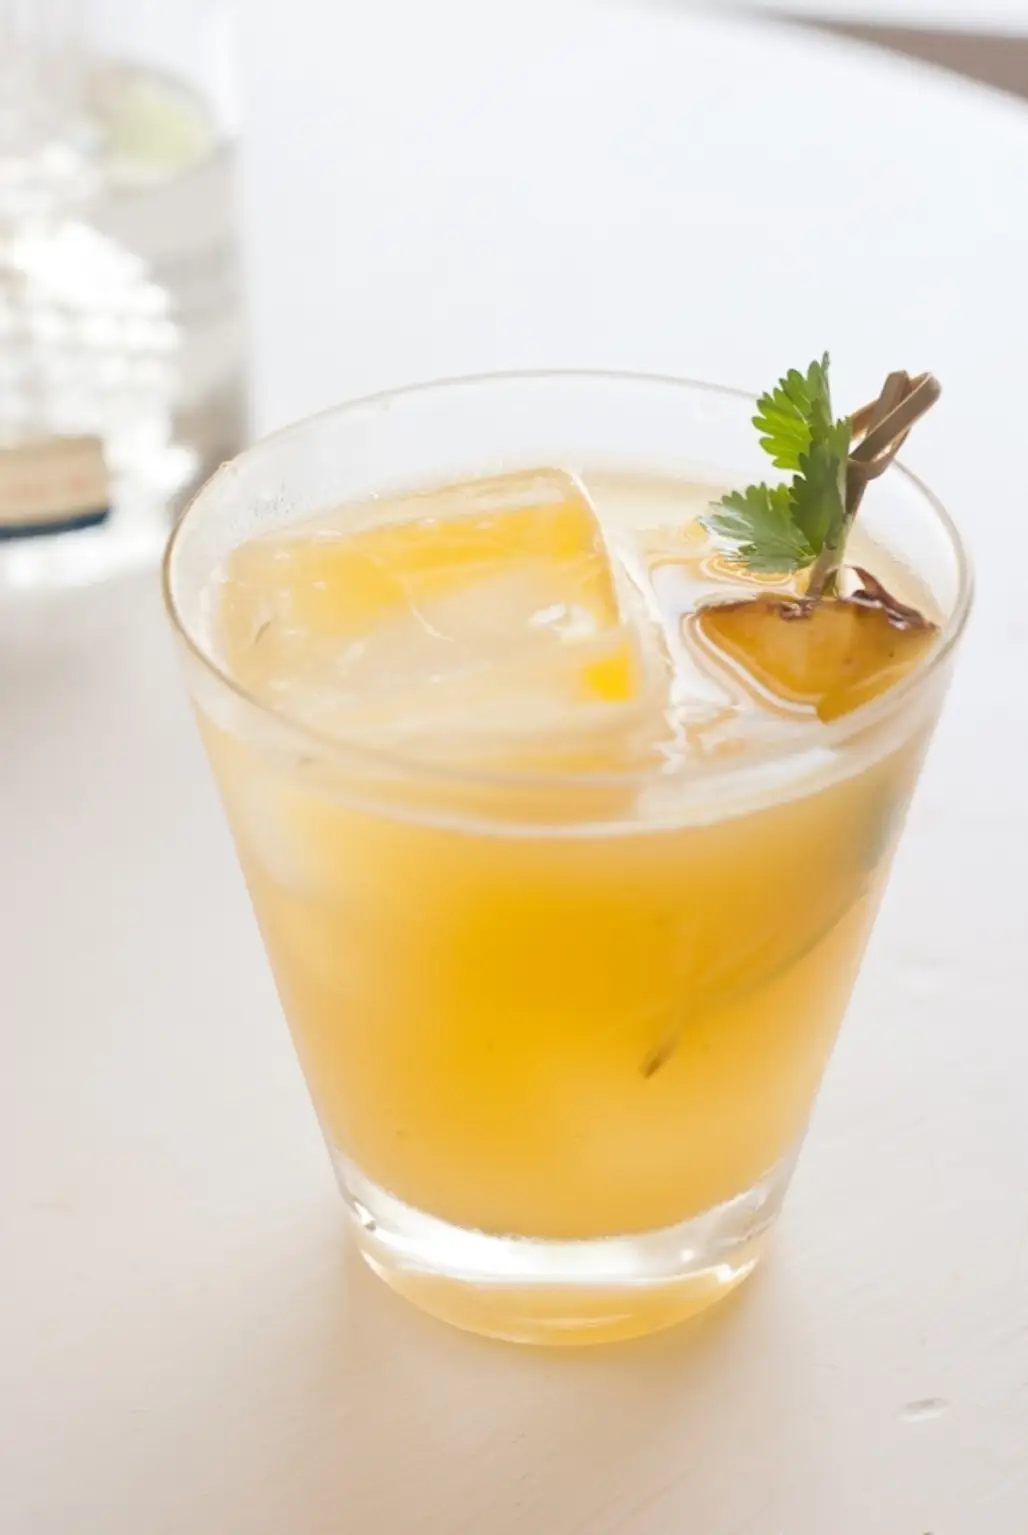 Pineapple and Mango Rum Cocktail